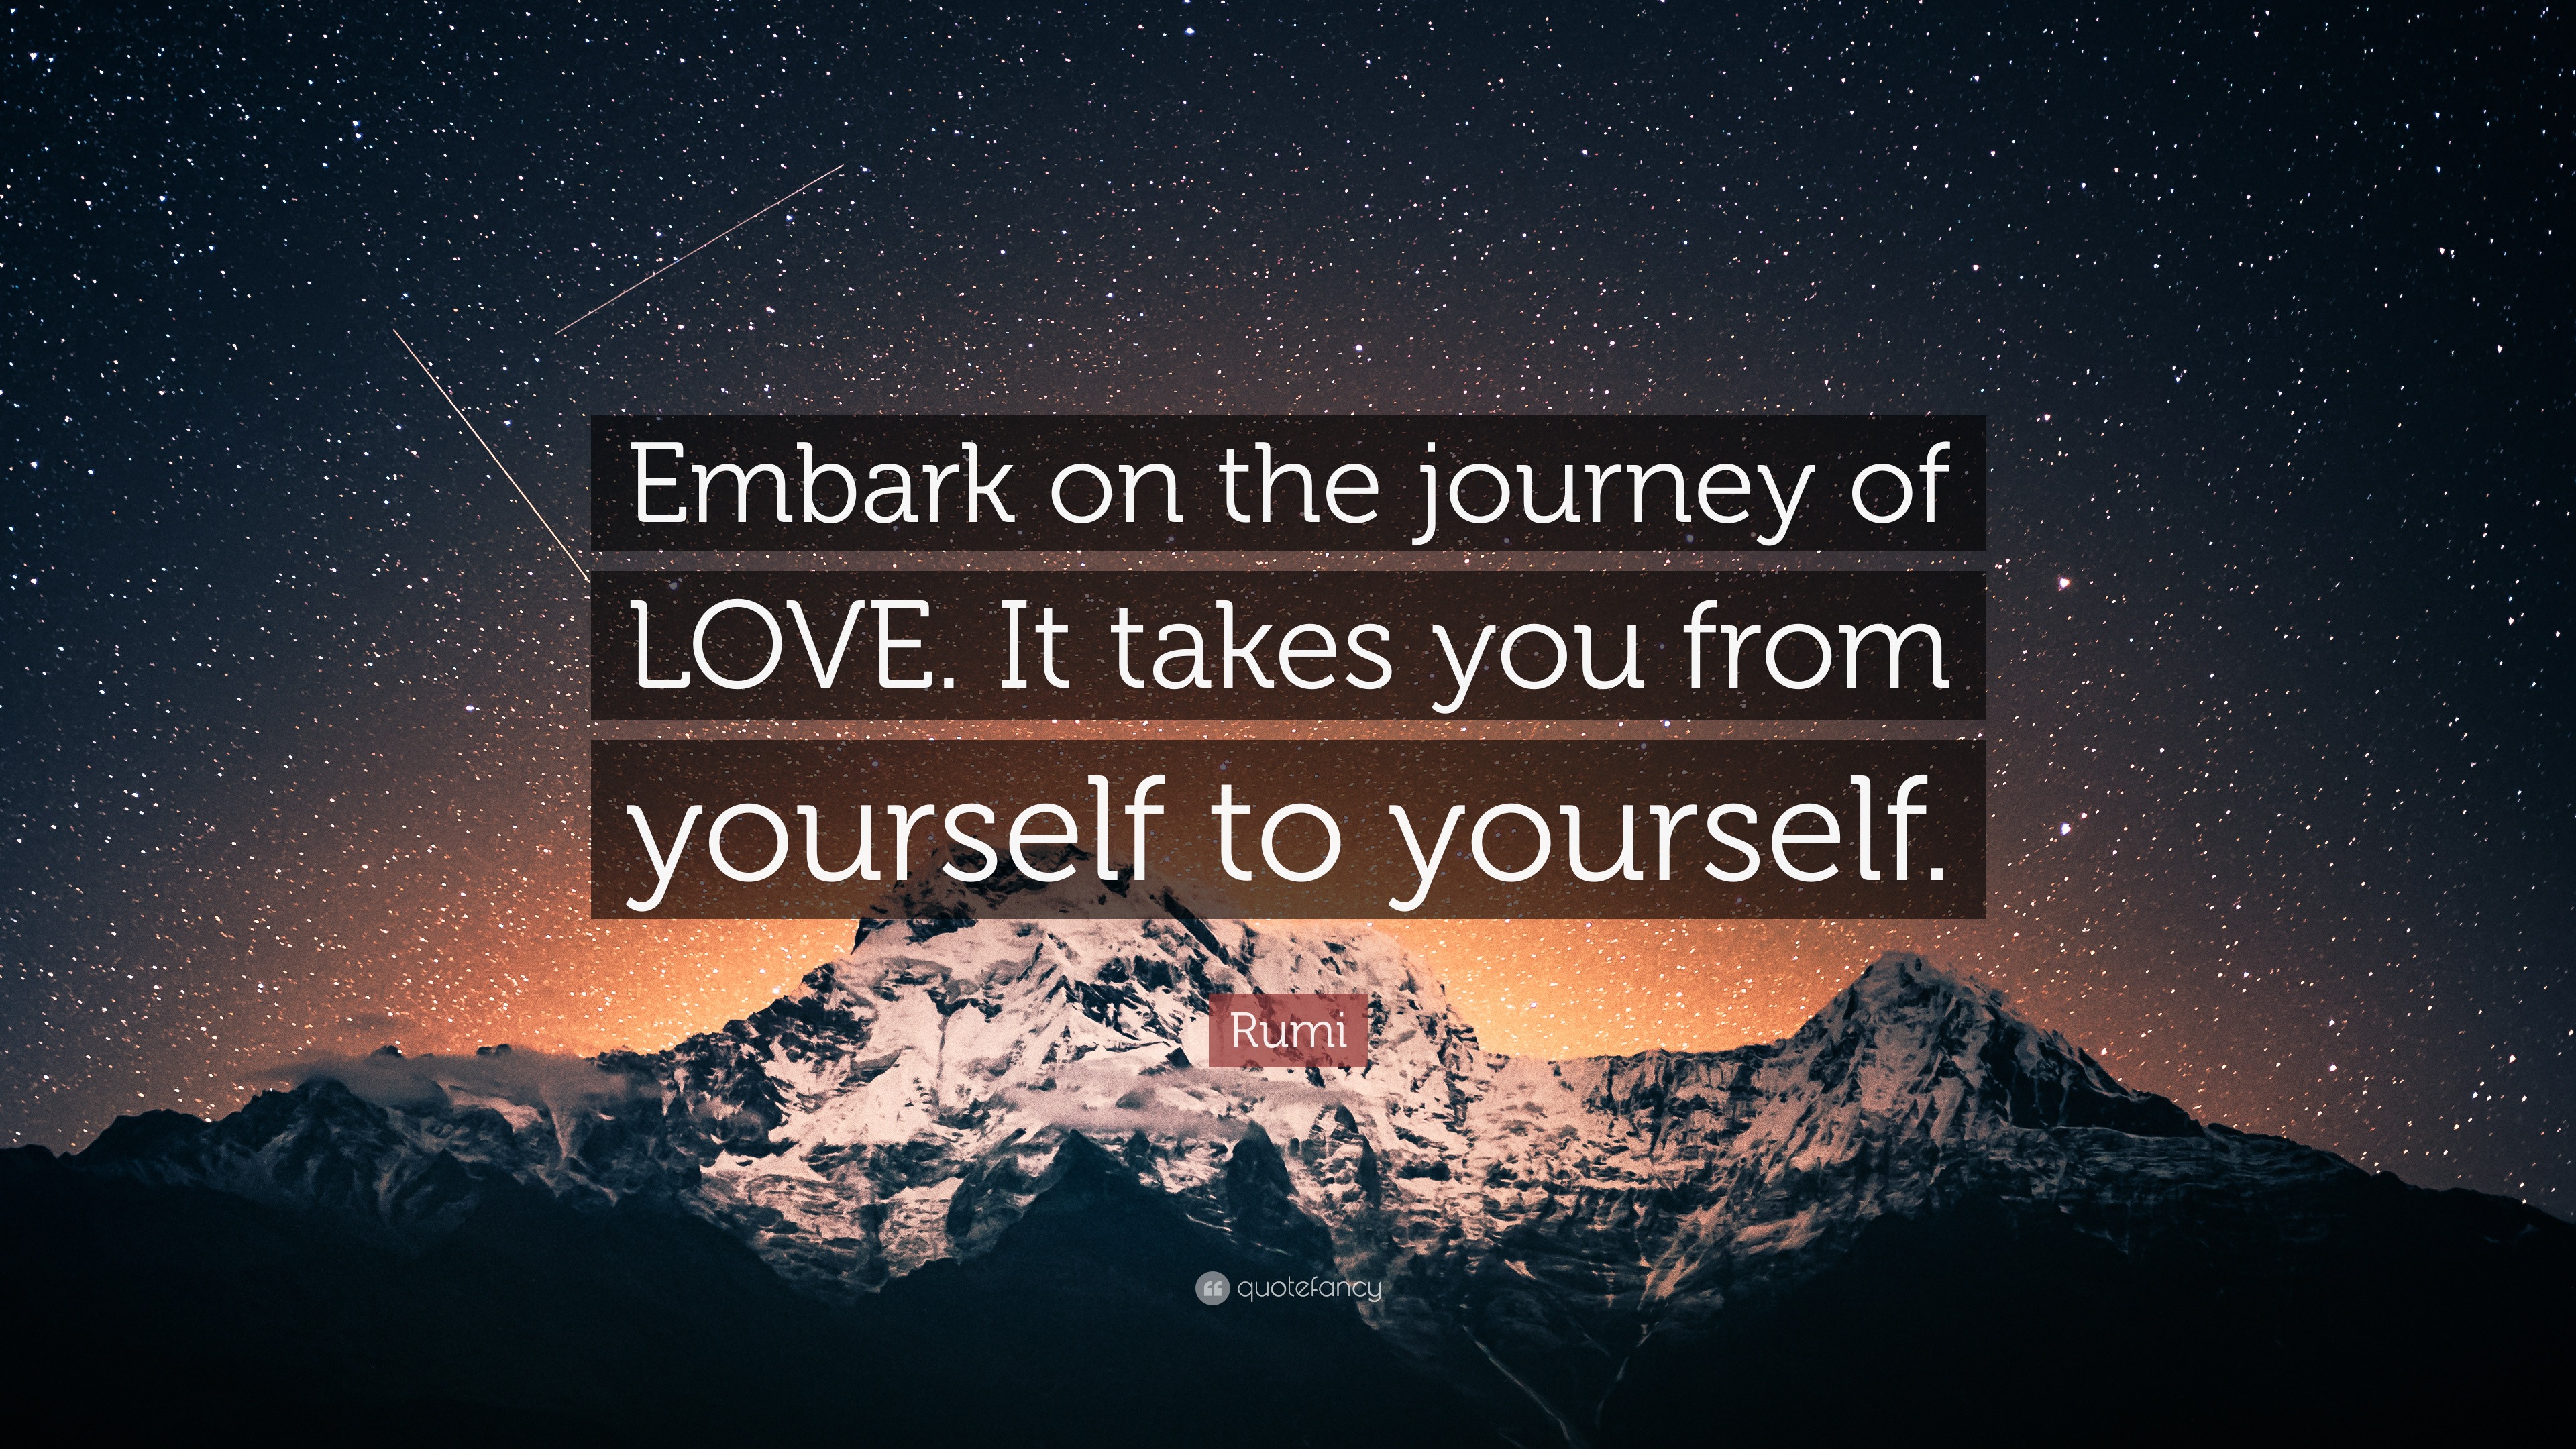 embark on a journey